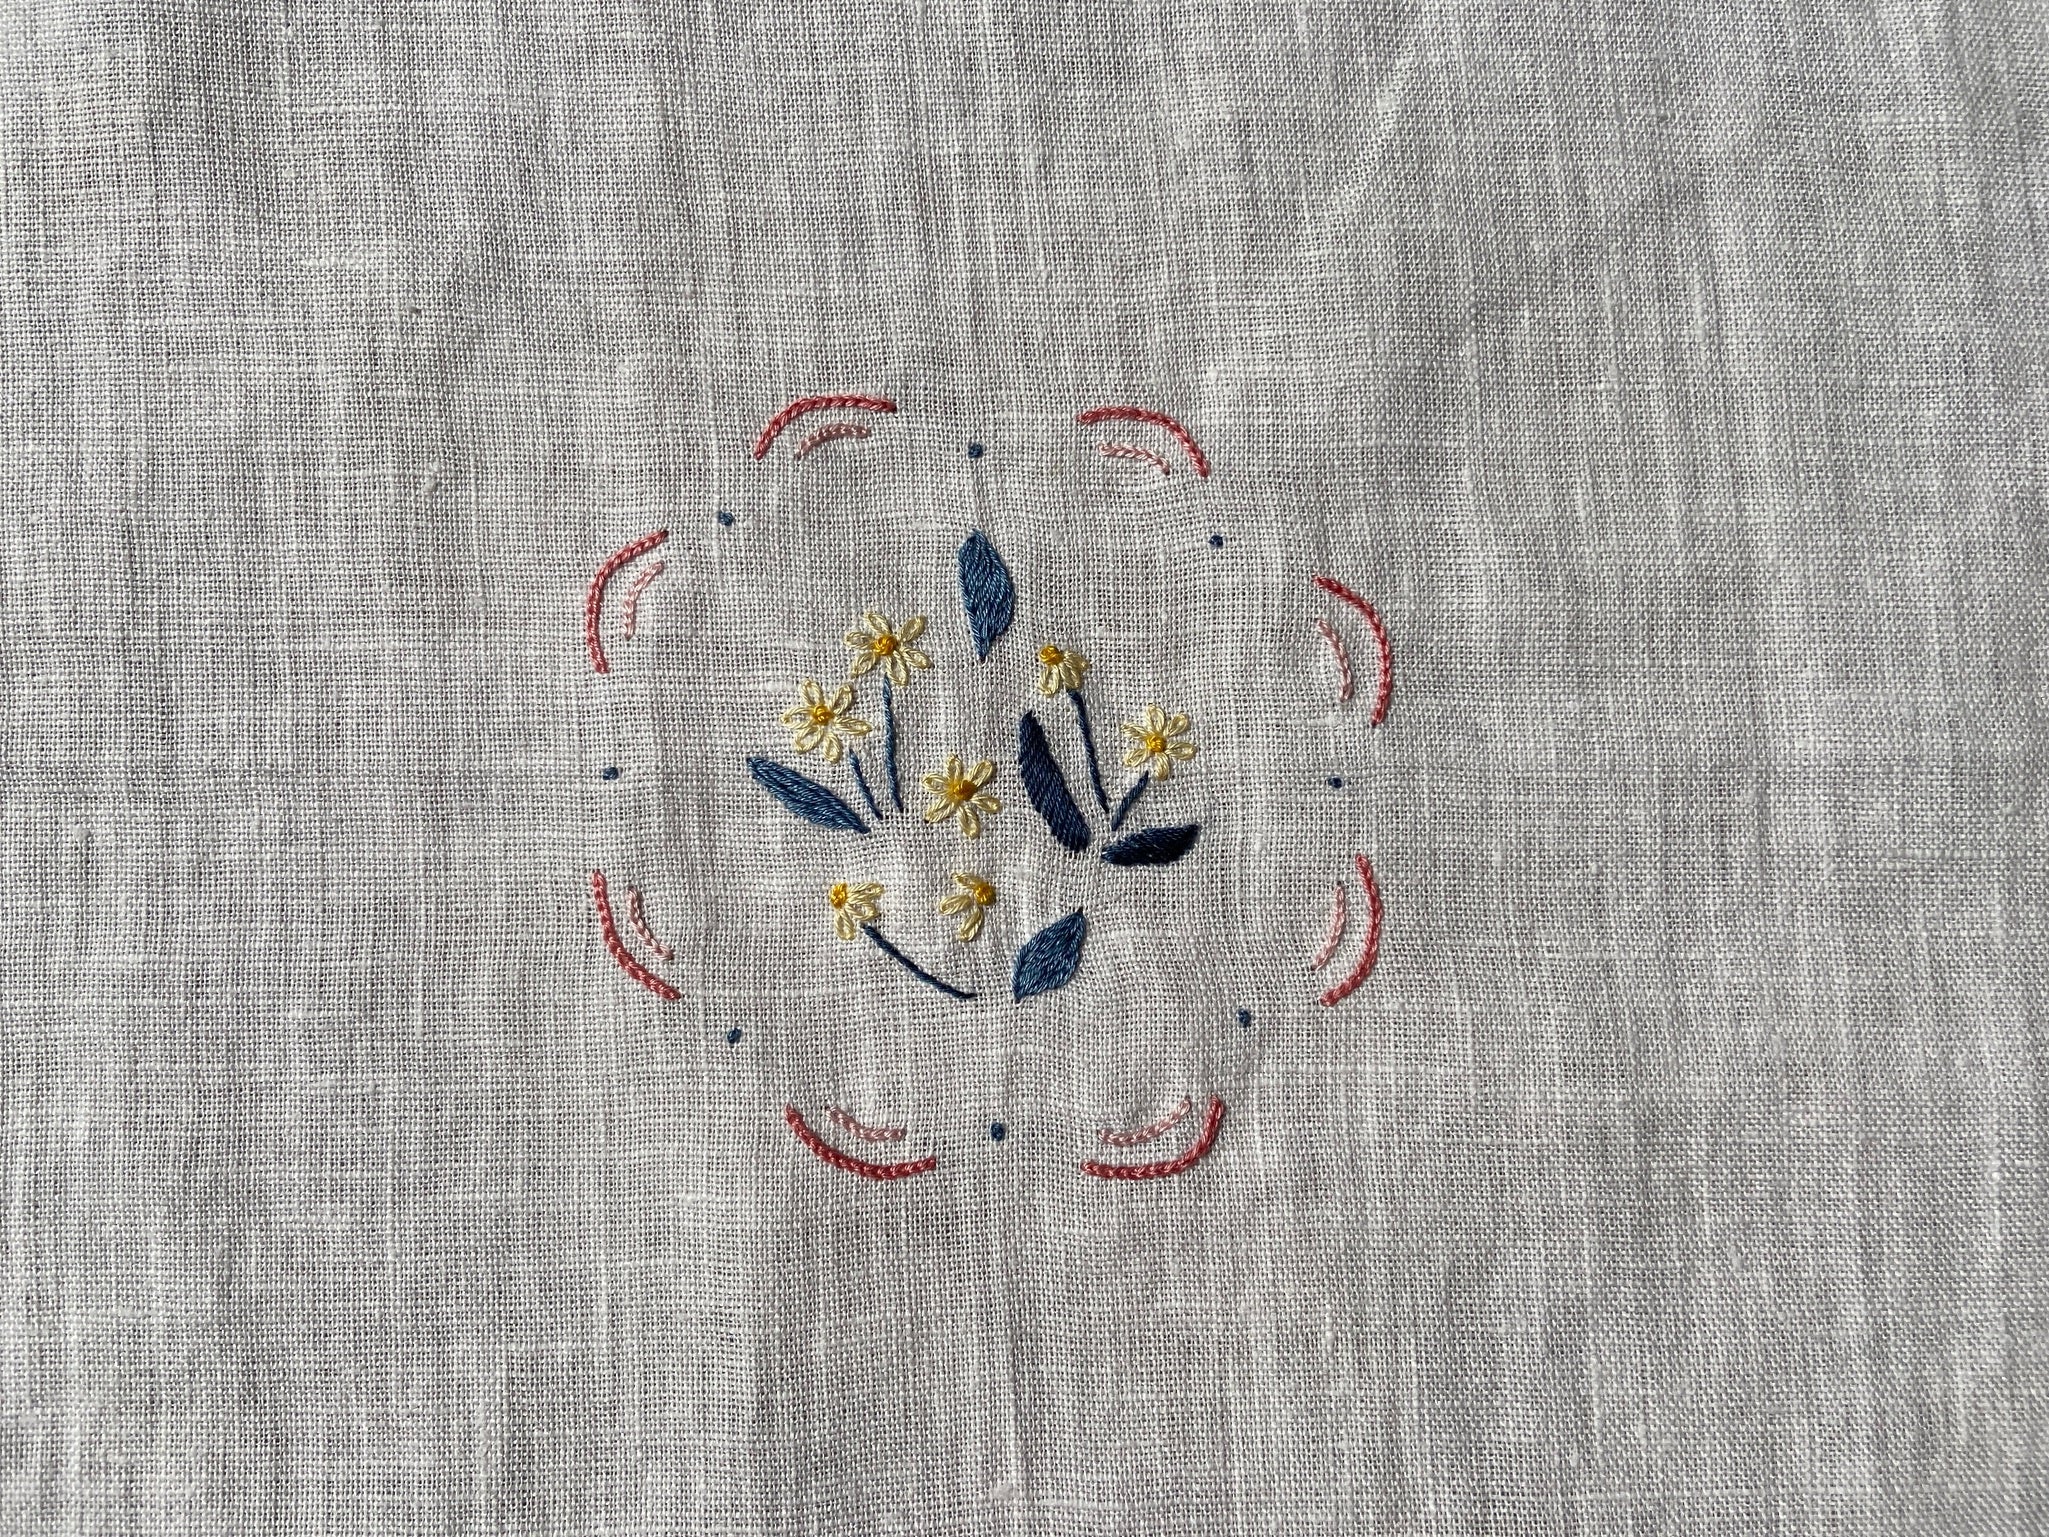 Hand Embroidered Linen Table Runner - White Floral Design